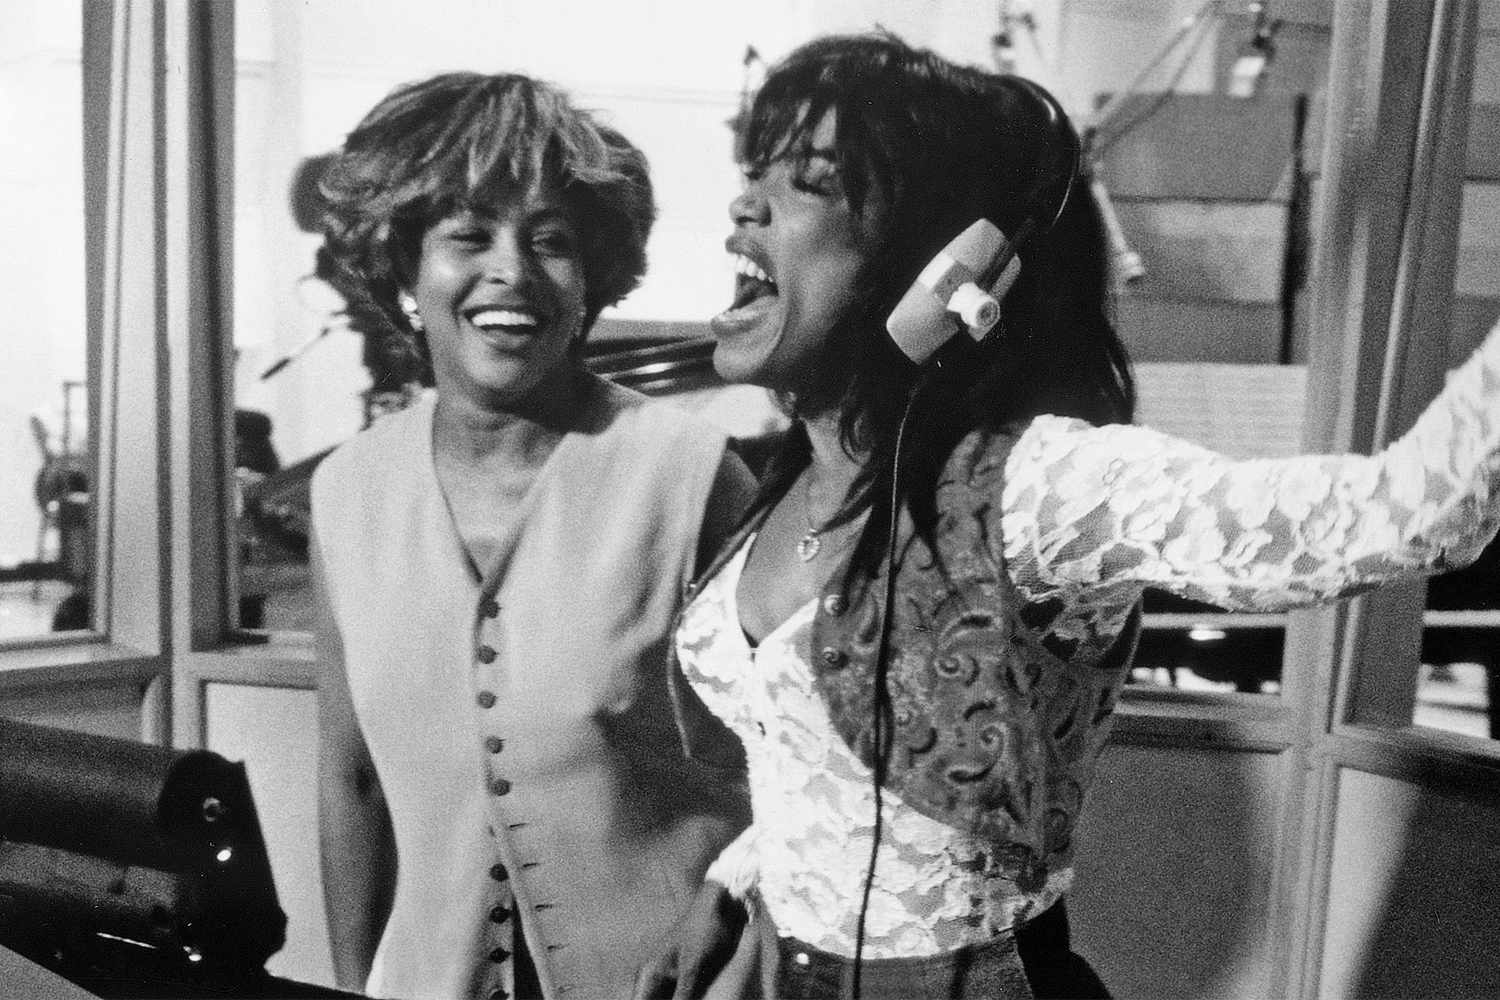 WHAT'S LOVE GOT TO DO WITH IT, from left: Tina Turner, Angela Bassett on the recording studio set, rehearse a song performance, 1993. ph: D Stevens / Â© Buena Vista Pictures / courtesy Everett Collection